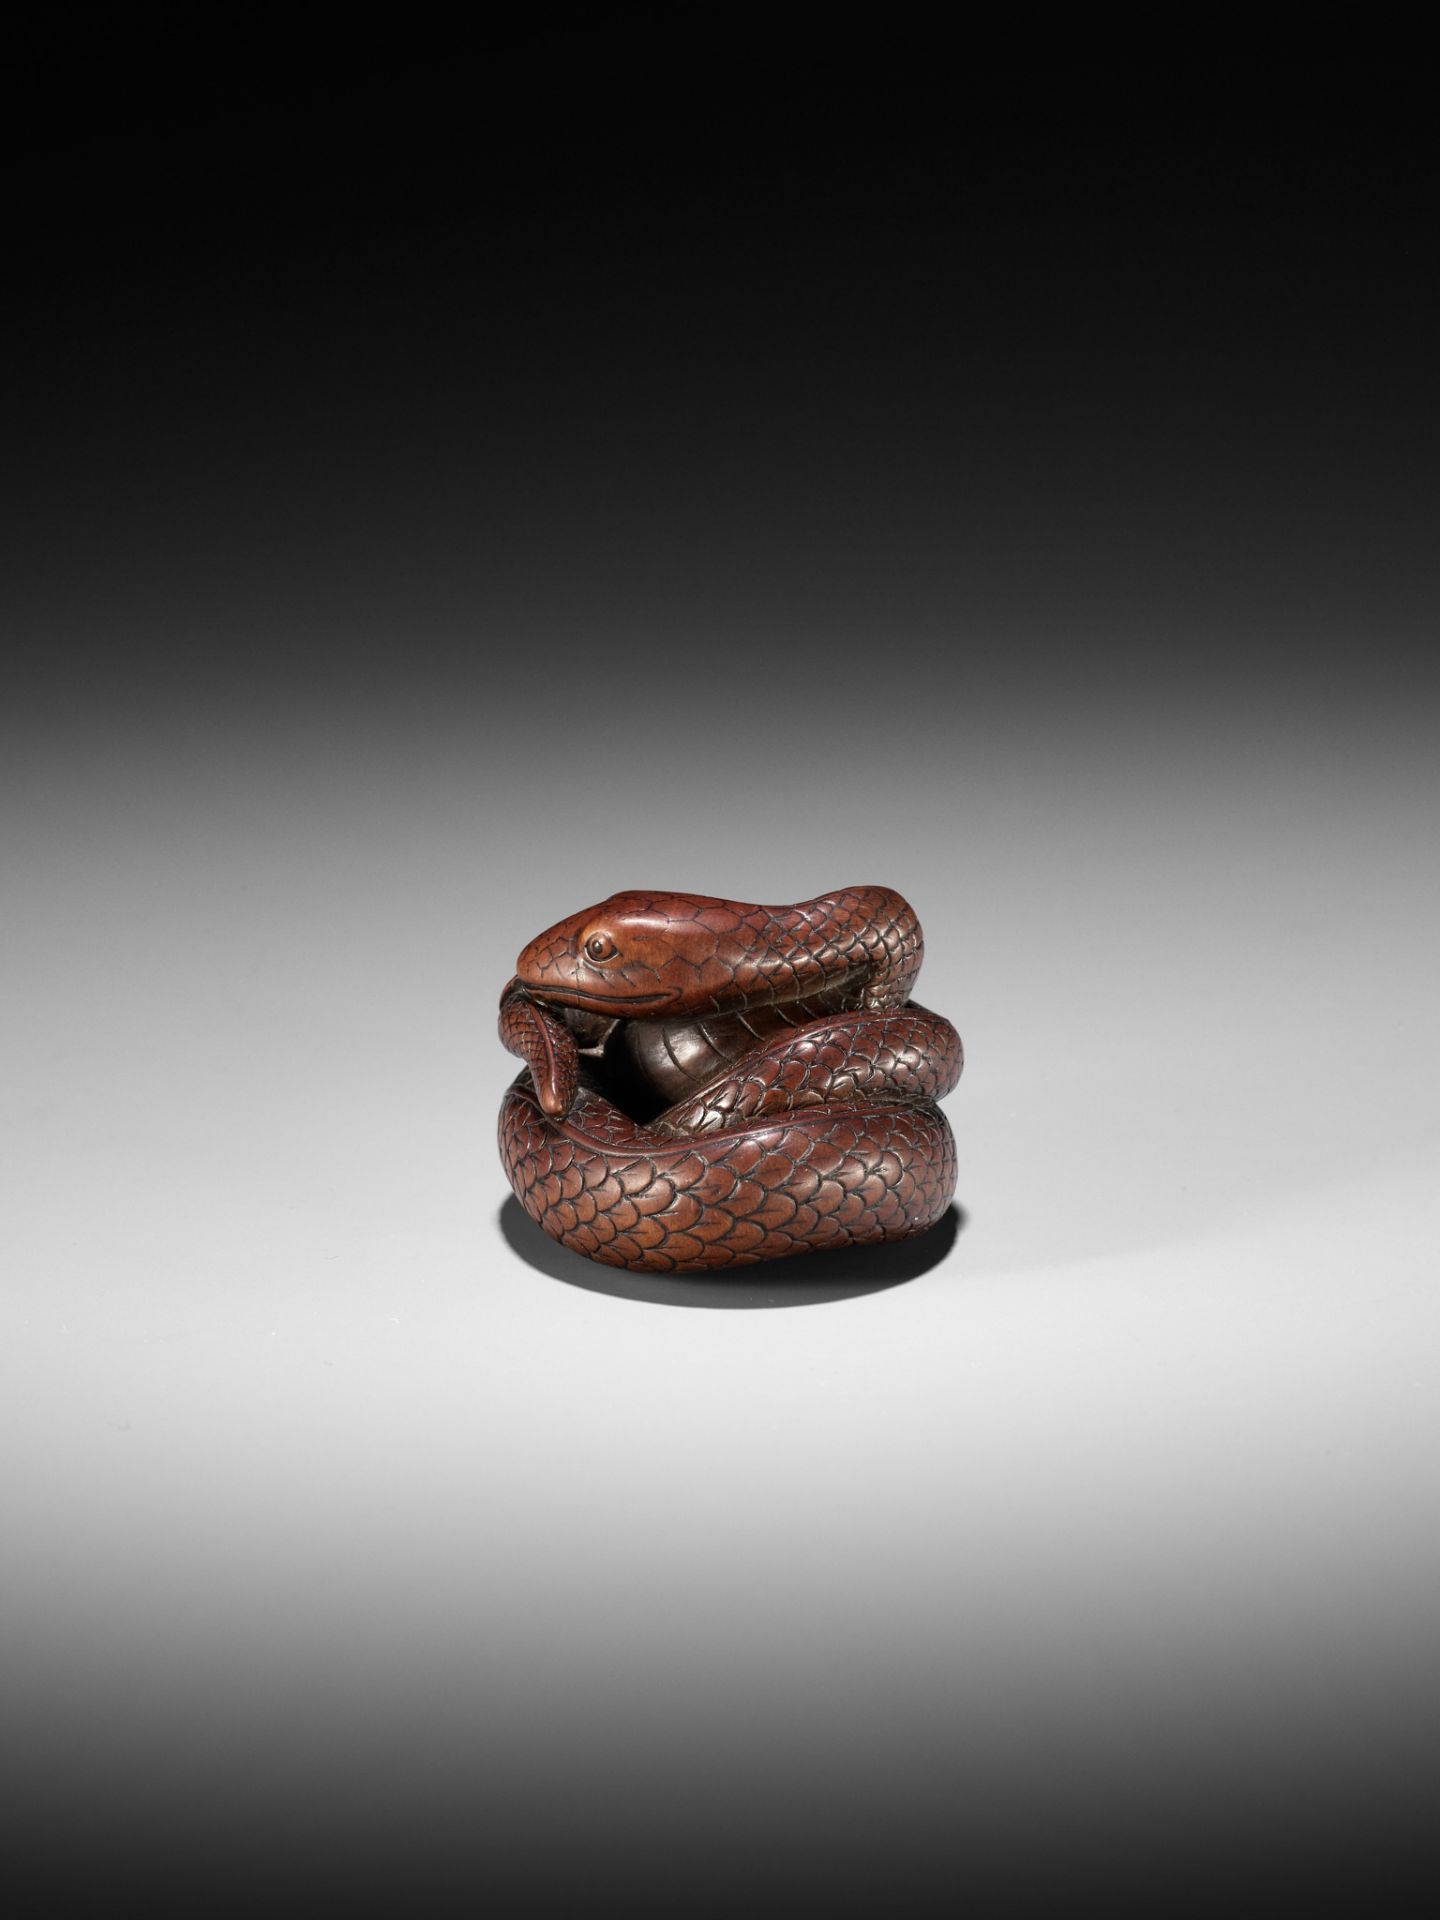 AN EXCEPTIONAL AND LARGE WOOD NETSUKE OF A SNAKE, ATTRIBUTED TO OKATOMO - Image 11 of 19